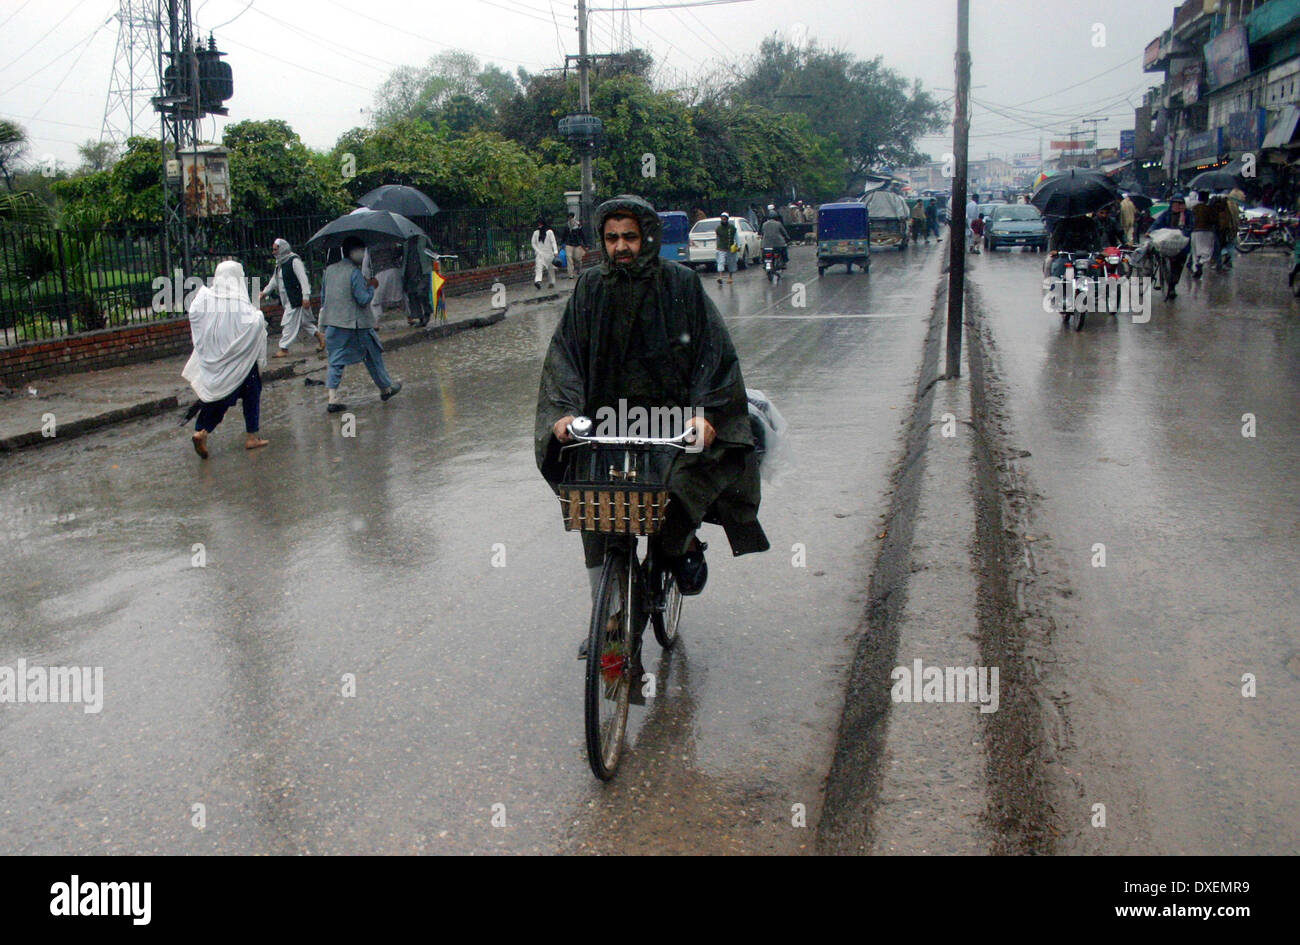 (140325) -- PESHAWAR, March 25, 2014 (Xinhua) -- A Pakistani man rides on a bicycle in rain in northwest Pakistan's Peshawar on March 25, 2014. Rain continues in many parts of the country in the last 48 hours. (Xinhua/Ahmad Sidique) (lmz) Stock Photo